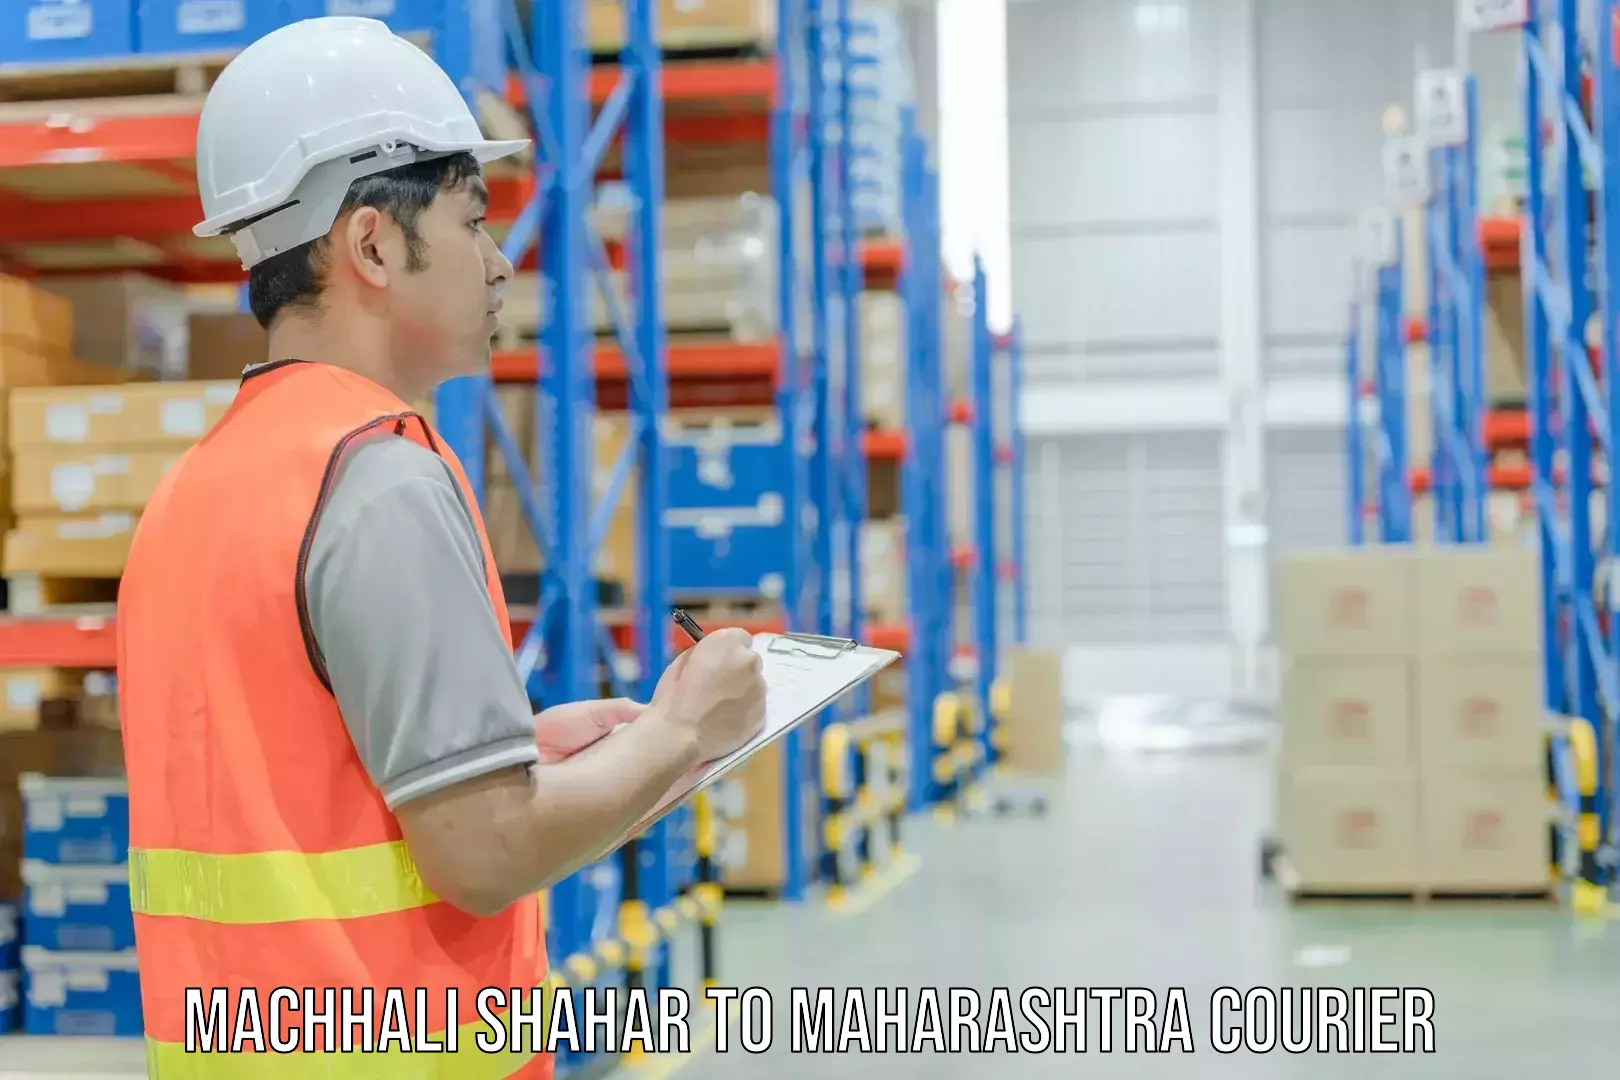 Next-day delivery options Machhali Shahar to Hinganghat